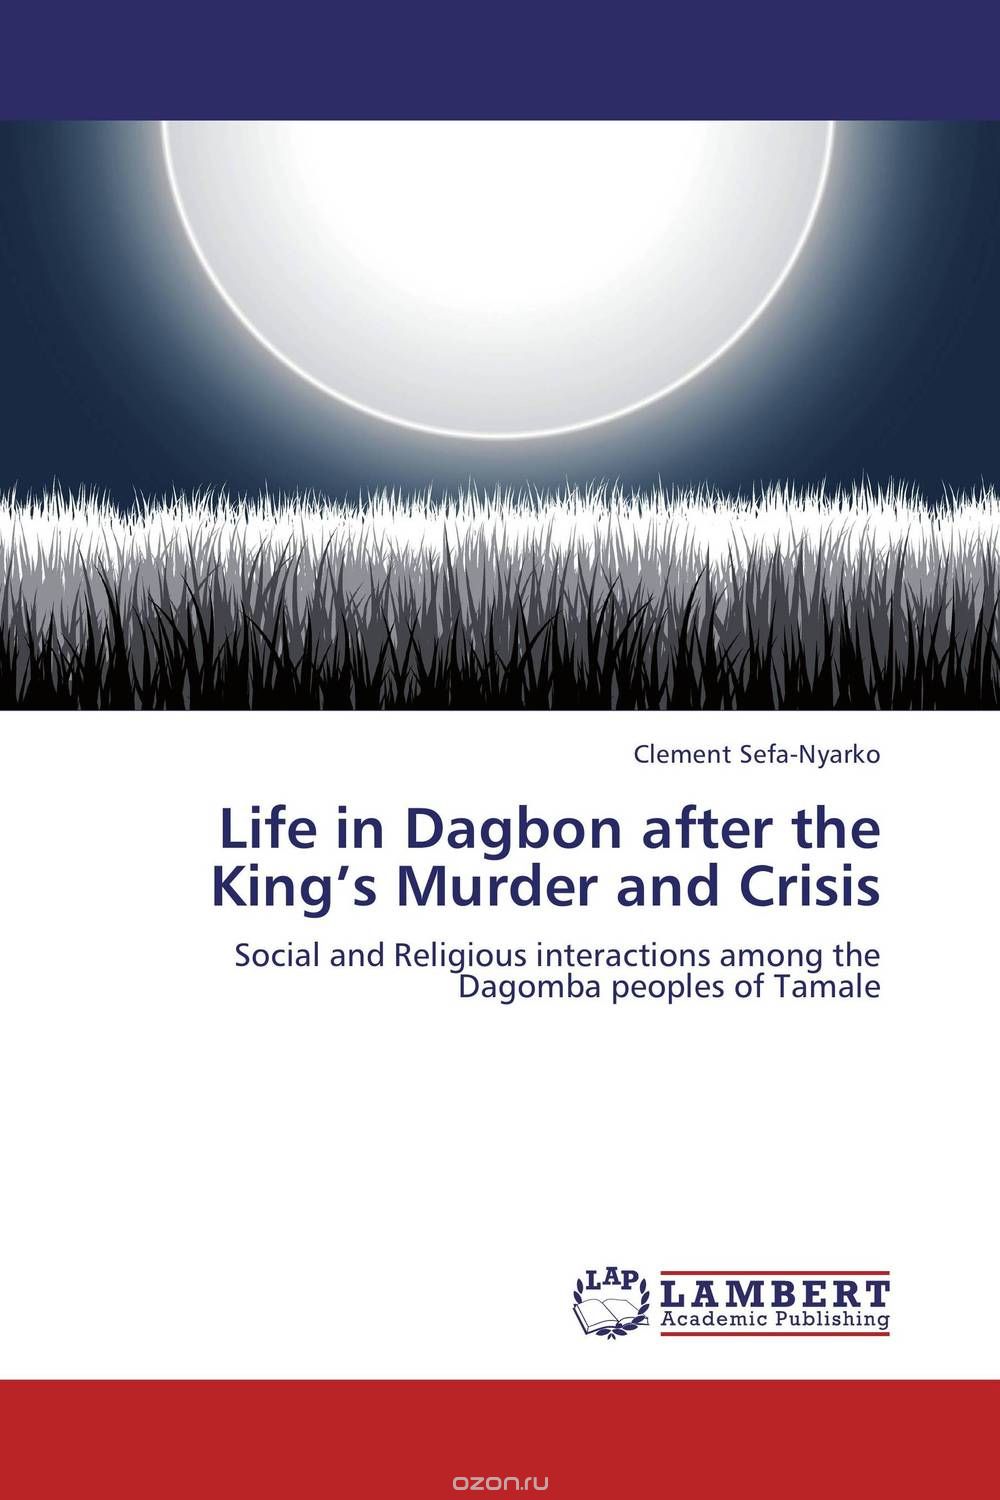 Life in Dagbon after the King’s Murder and Crisis